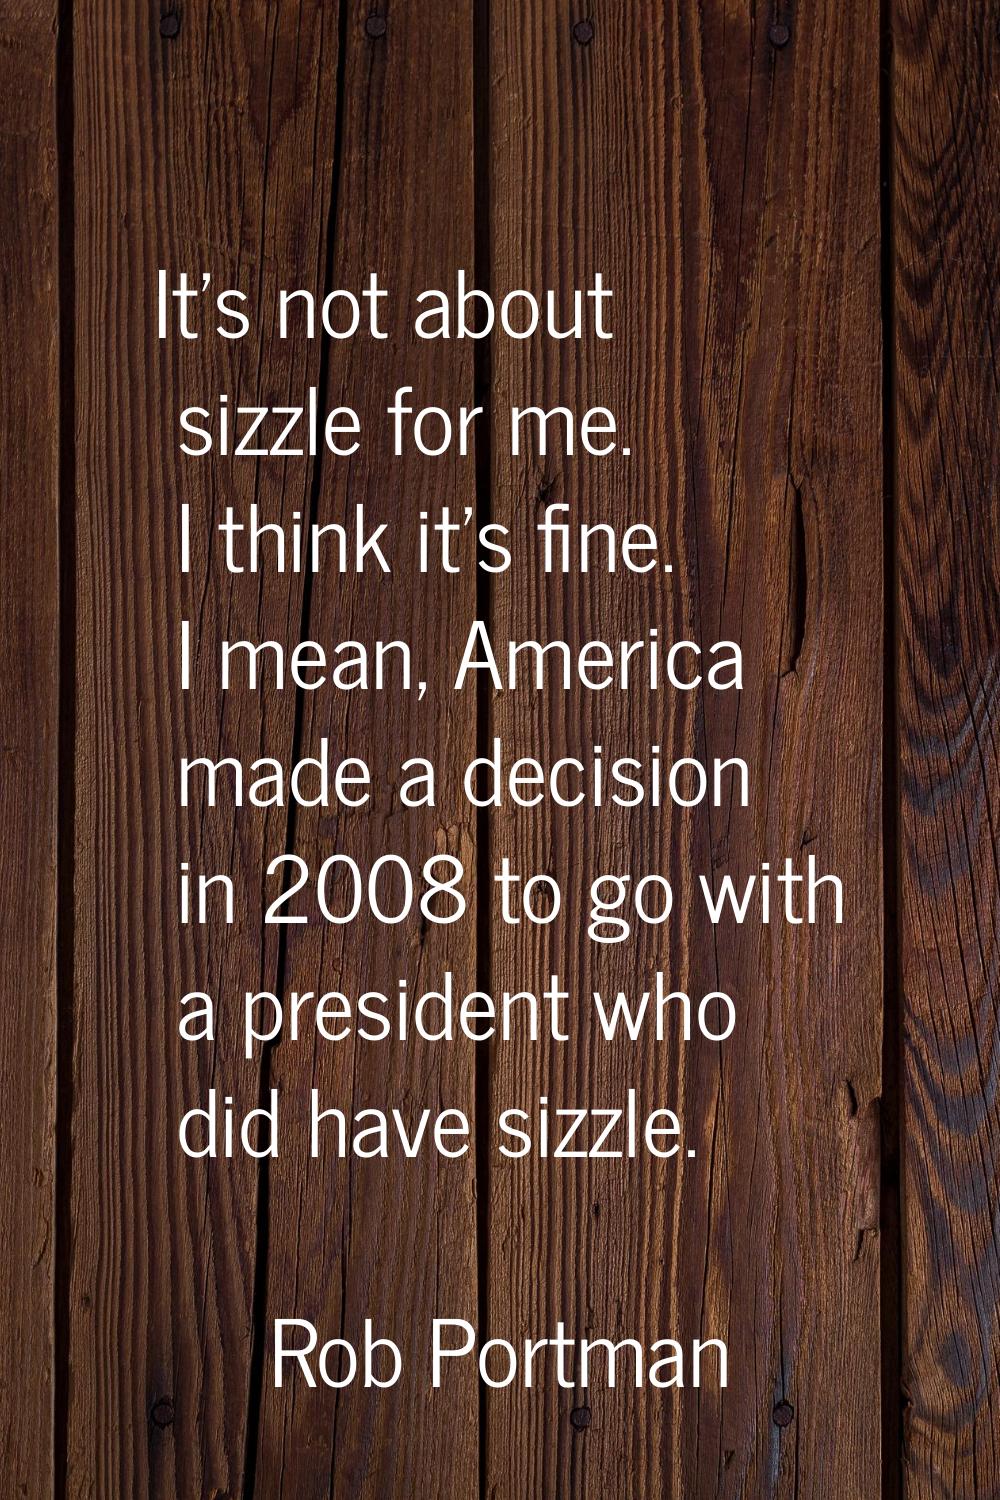 It's not about sizzle for me. I think it's fine. I mean, America made a decision in 2008 to go with